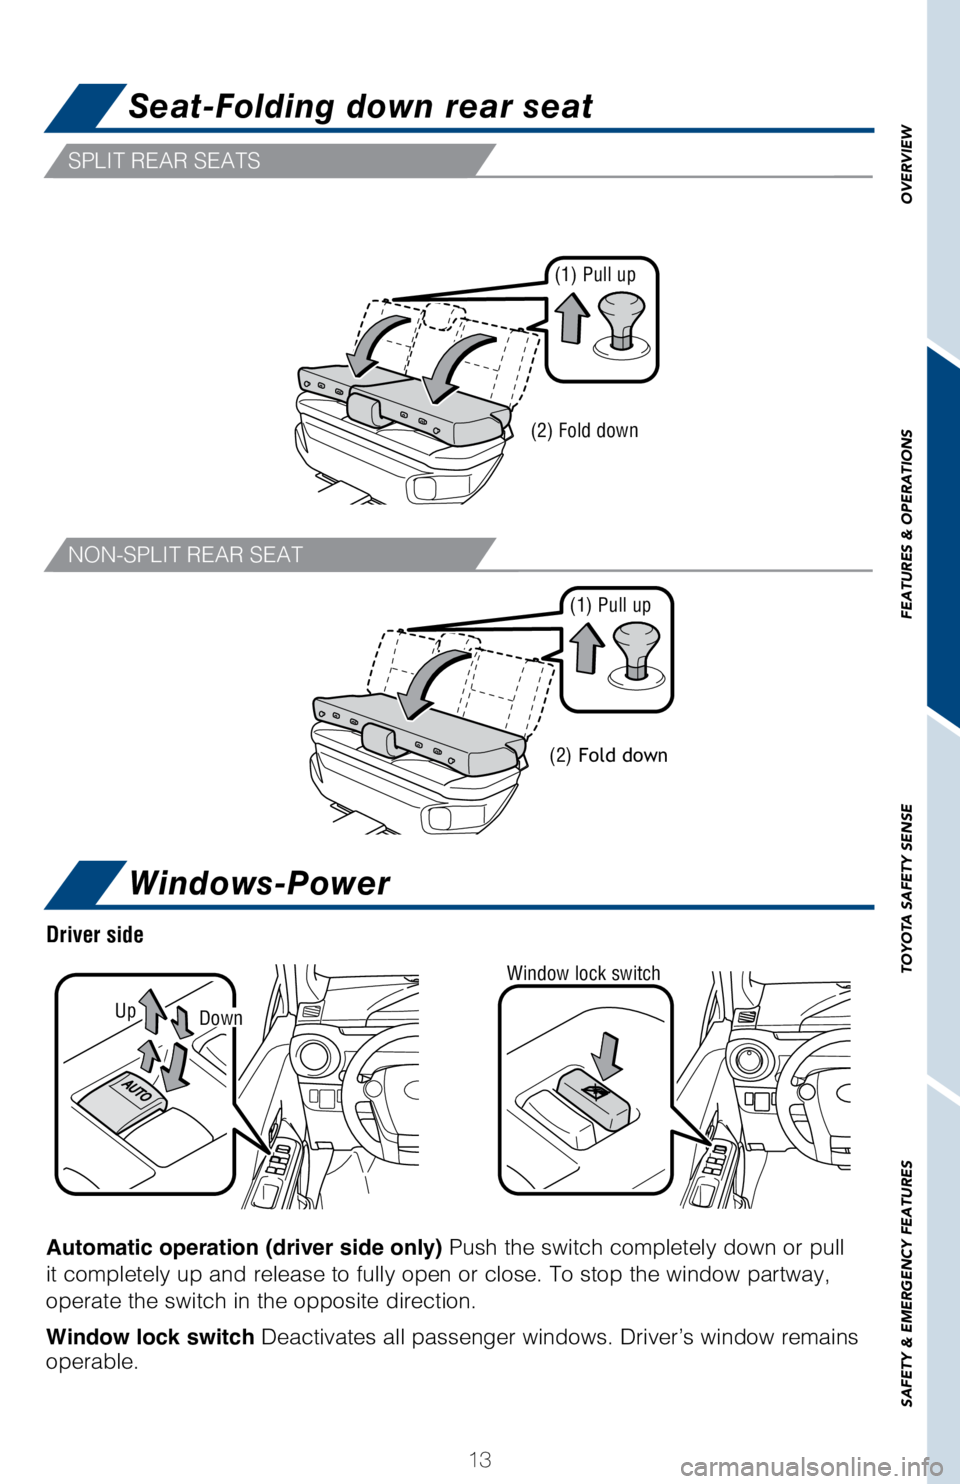 TOYOTA PRIUS C 2018   (in English) User Guide 13
OVERVIEW
FEATURES & OPERATIONS
TOYOTA SAFETY SENSE
SAFETY & EMERGENCY FEATURES
SPLIT REAR SEATS
NON-SPLIT REAR SEAT
Seat-Folding down rear seat
Windows-Power
(1) Pull up
(2) Fold down
(1) Pull up
(